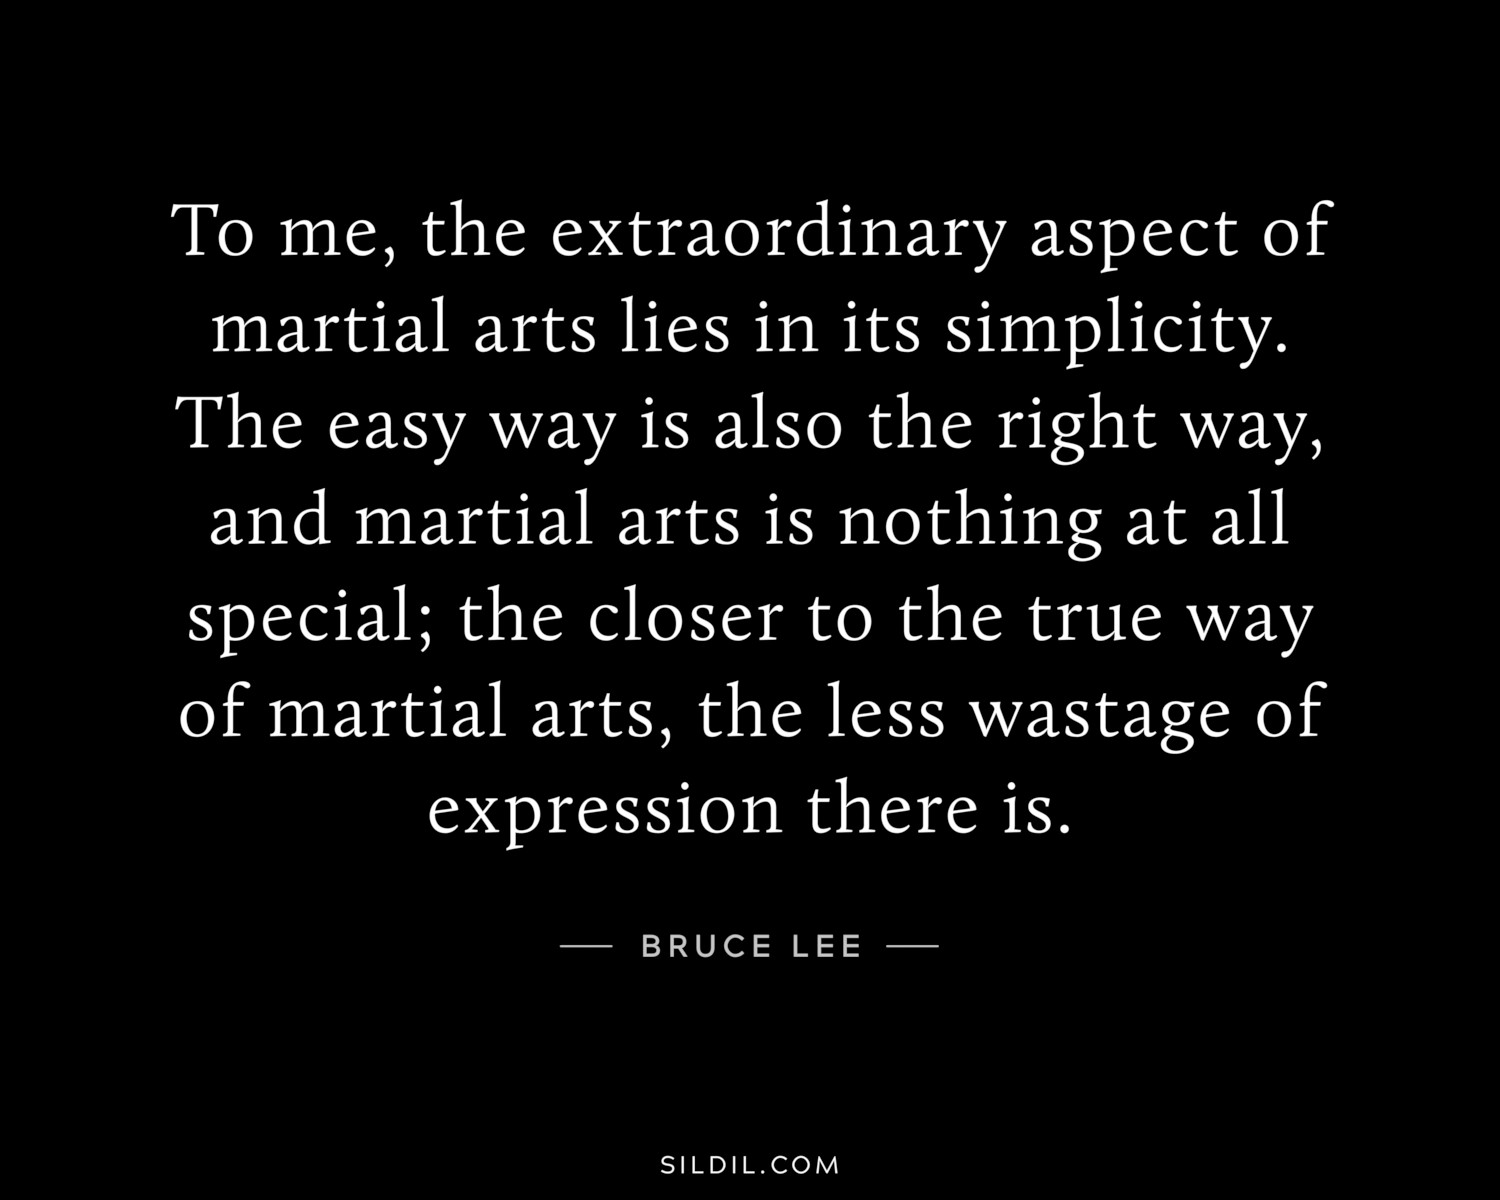 To me, the extraordinary aspect of martial arts lies in its simplicity. The easy way is also the right way, and martial arts is nothing at all special; the closer to the true way of martial arts, the less wastage of expression there is.